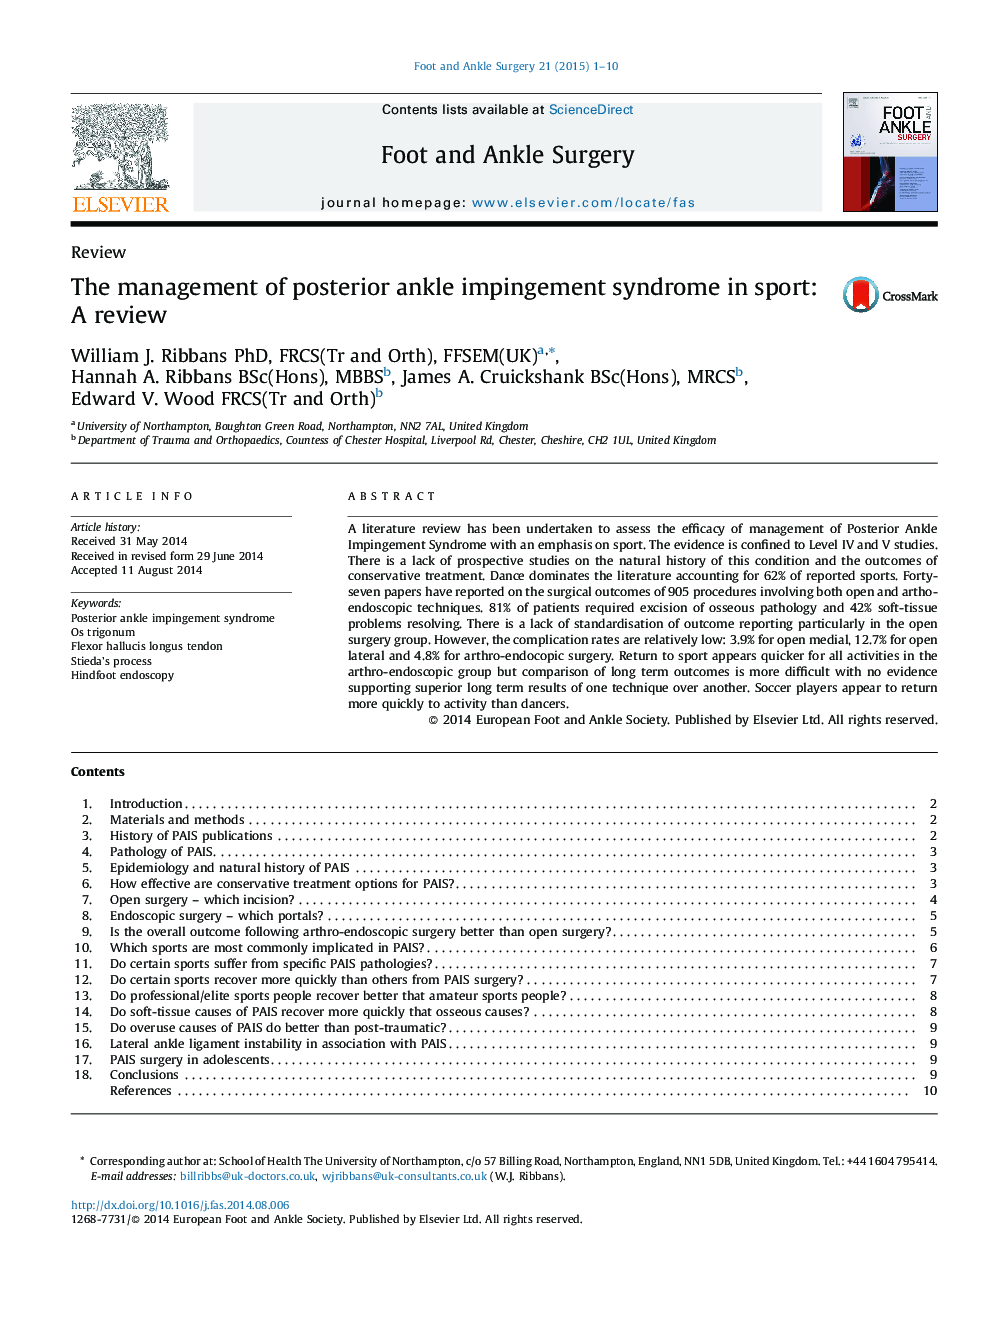 The management of posterior ankle impingement syndrome in sport: A review